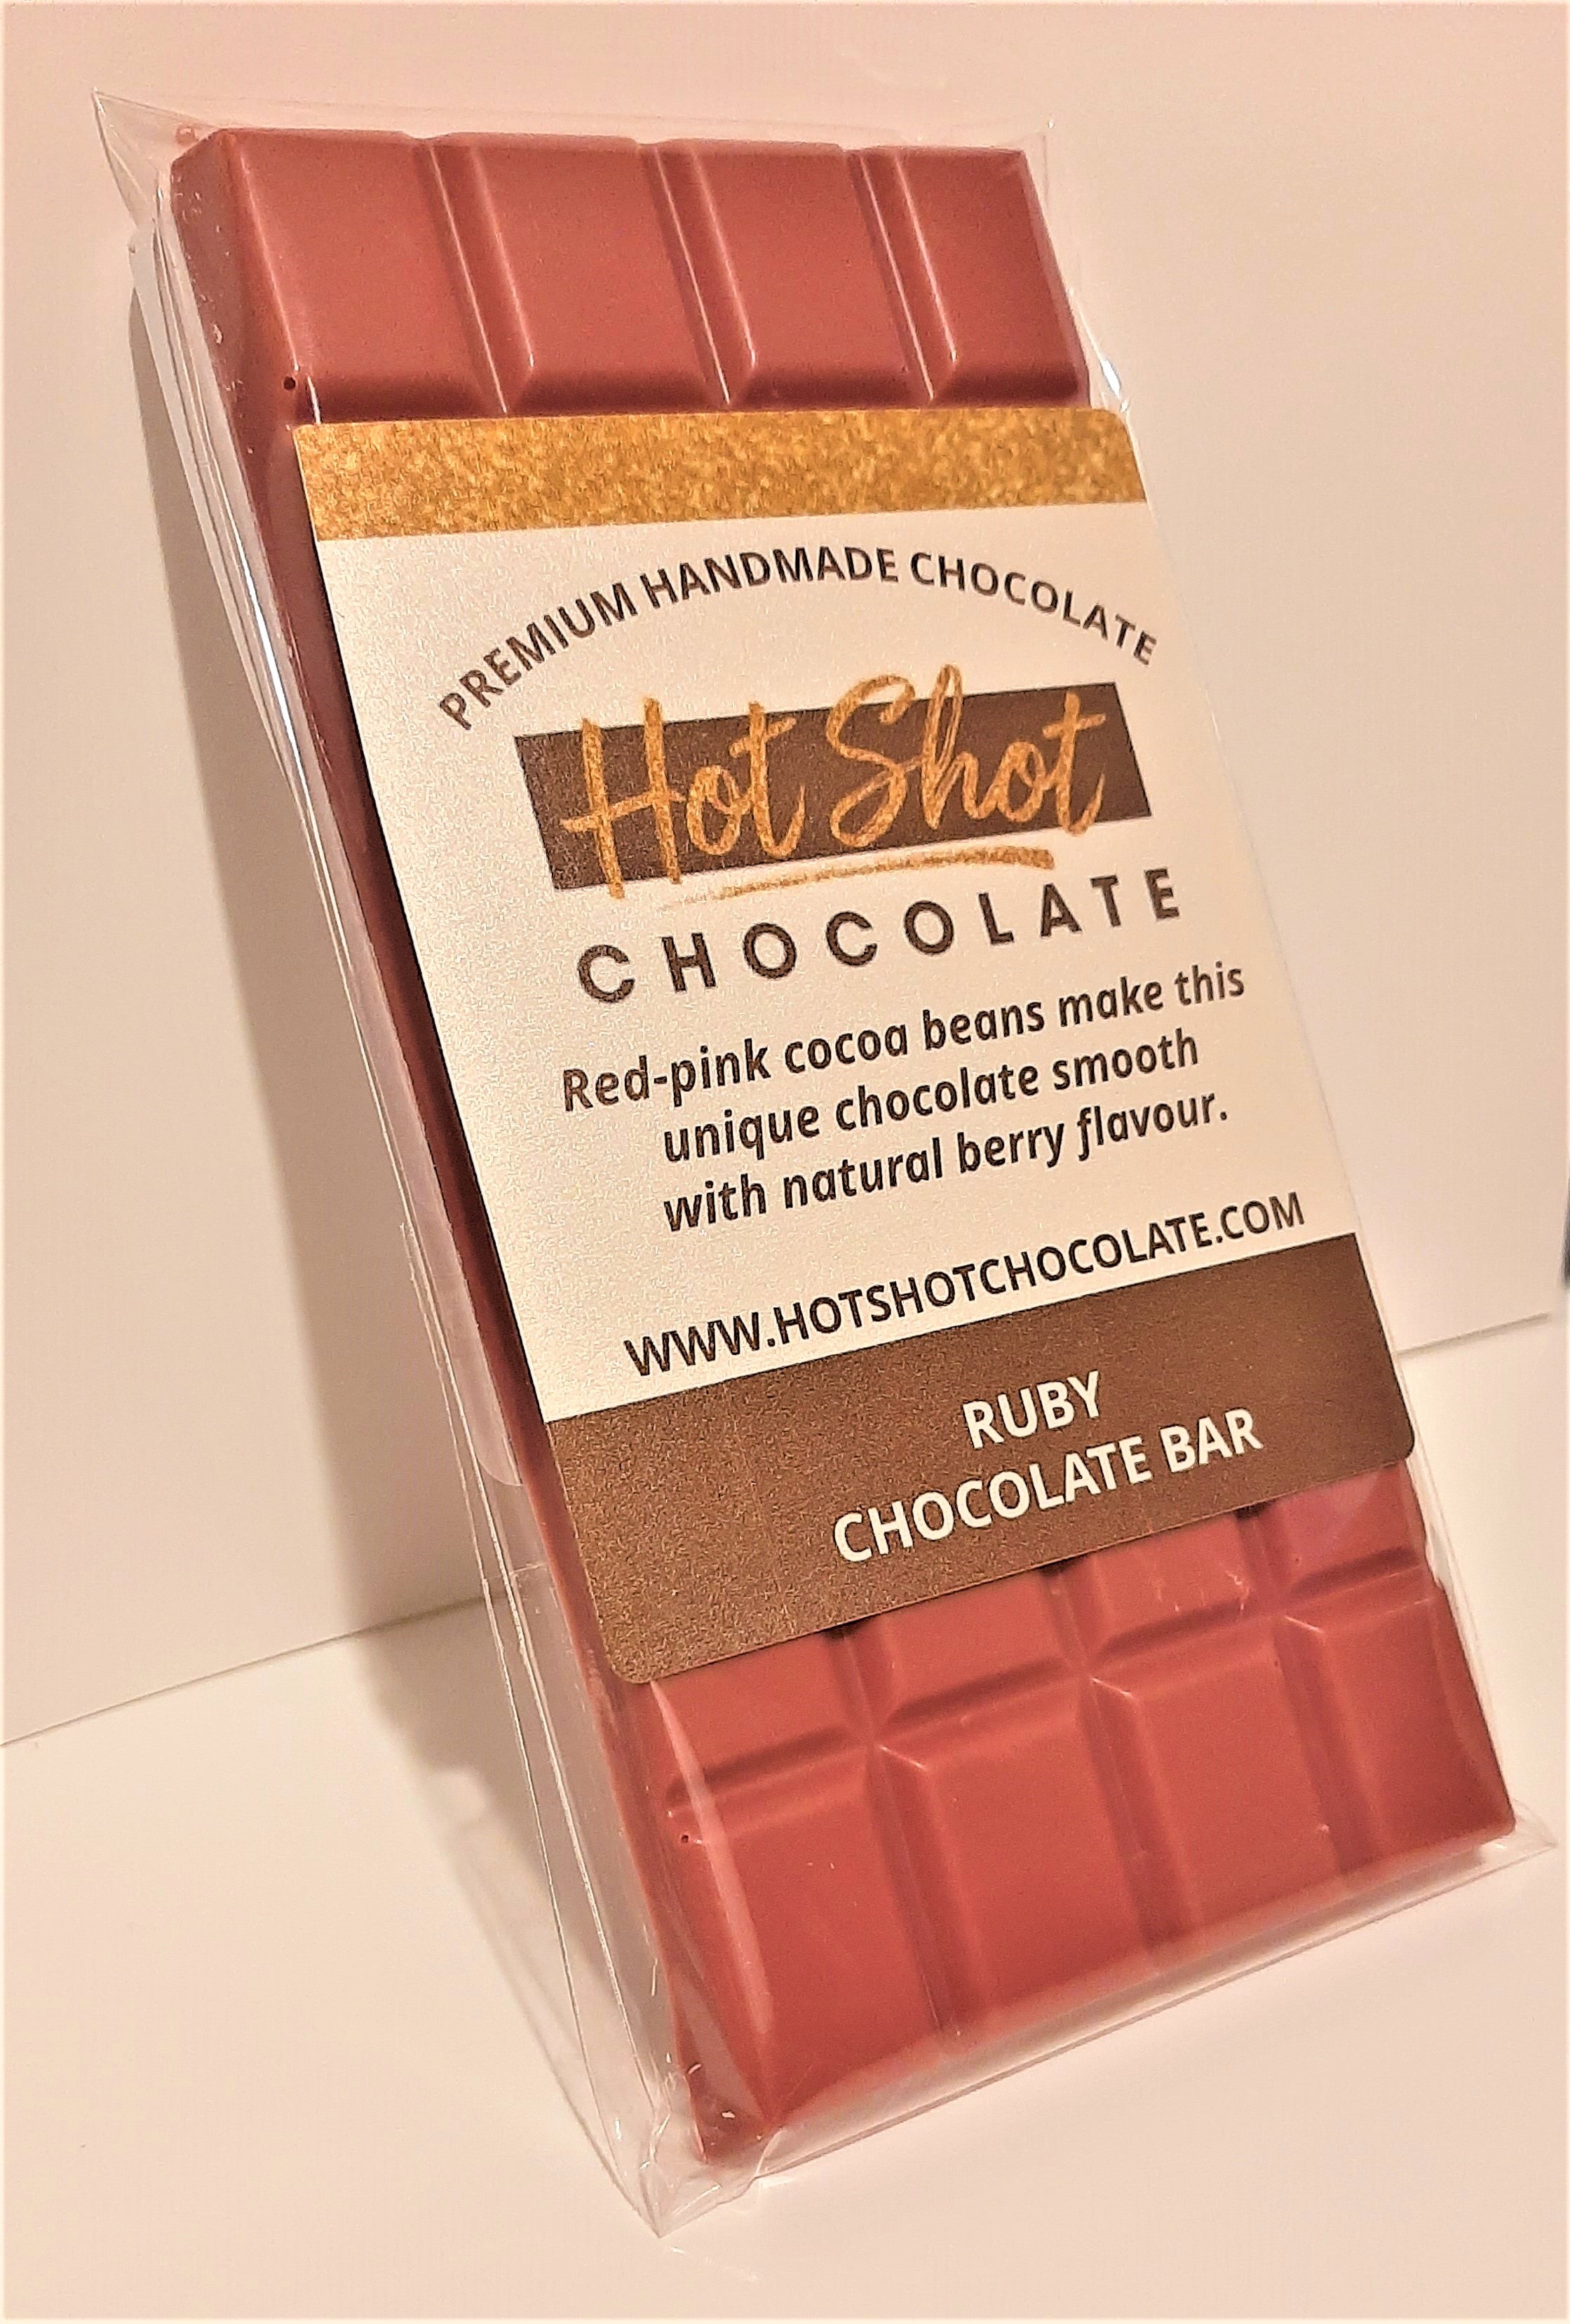 What is Ruby chocolate? 